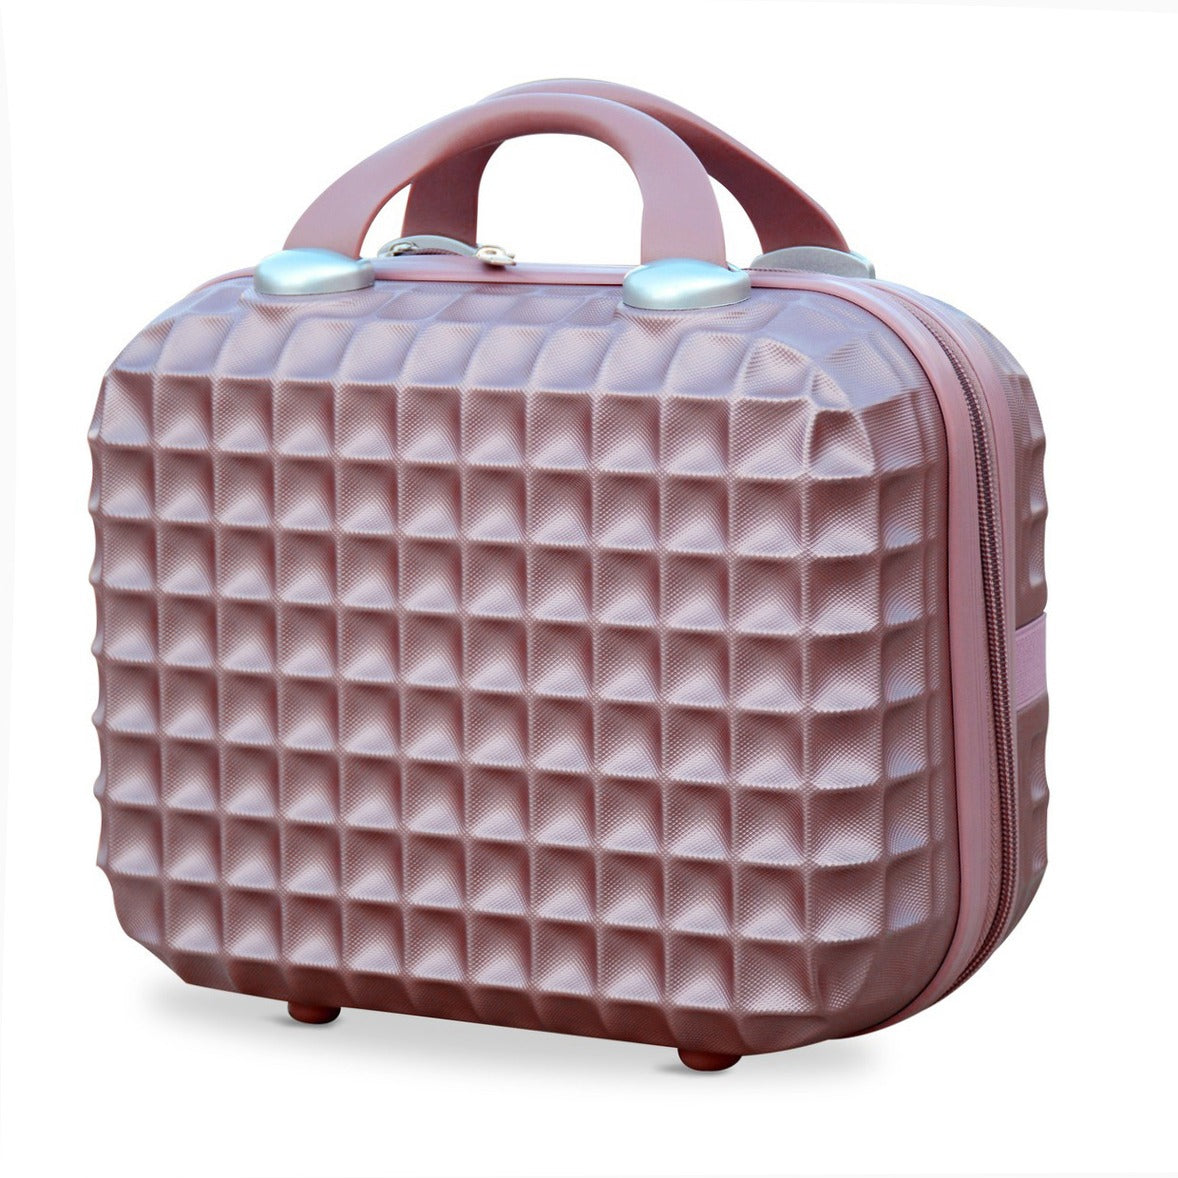 4 Piece Set 7" 20" 24" 28 Inches Rose Gold Colour Square Cut ABS Lightweight Beauty Case Zaappy.com